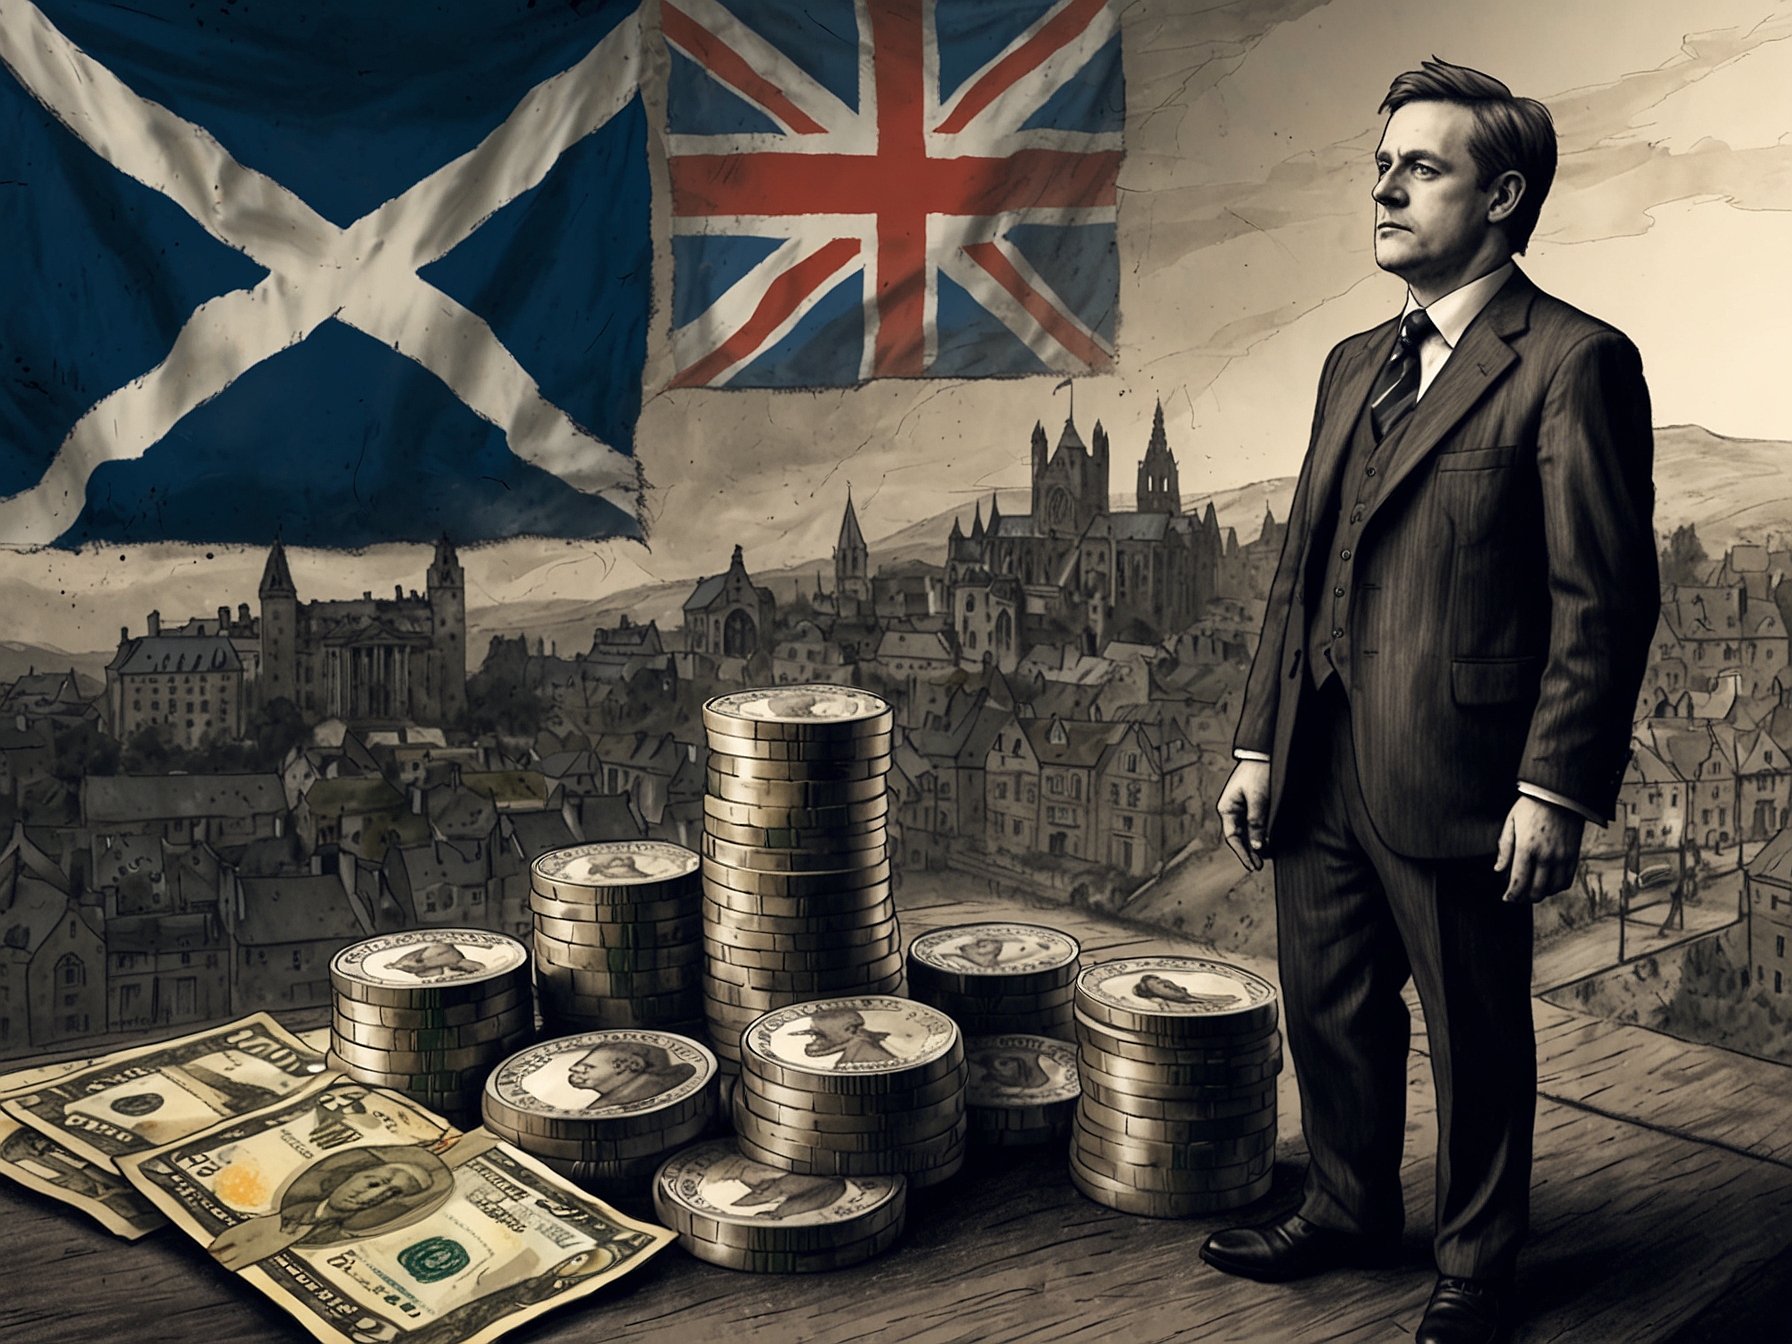 A graphical representation showing the potential financial challenges and benefits of Scottish independence, including new governmental institutions, trade agreements, and economic policy decisions.